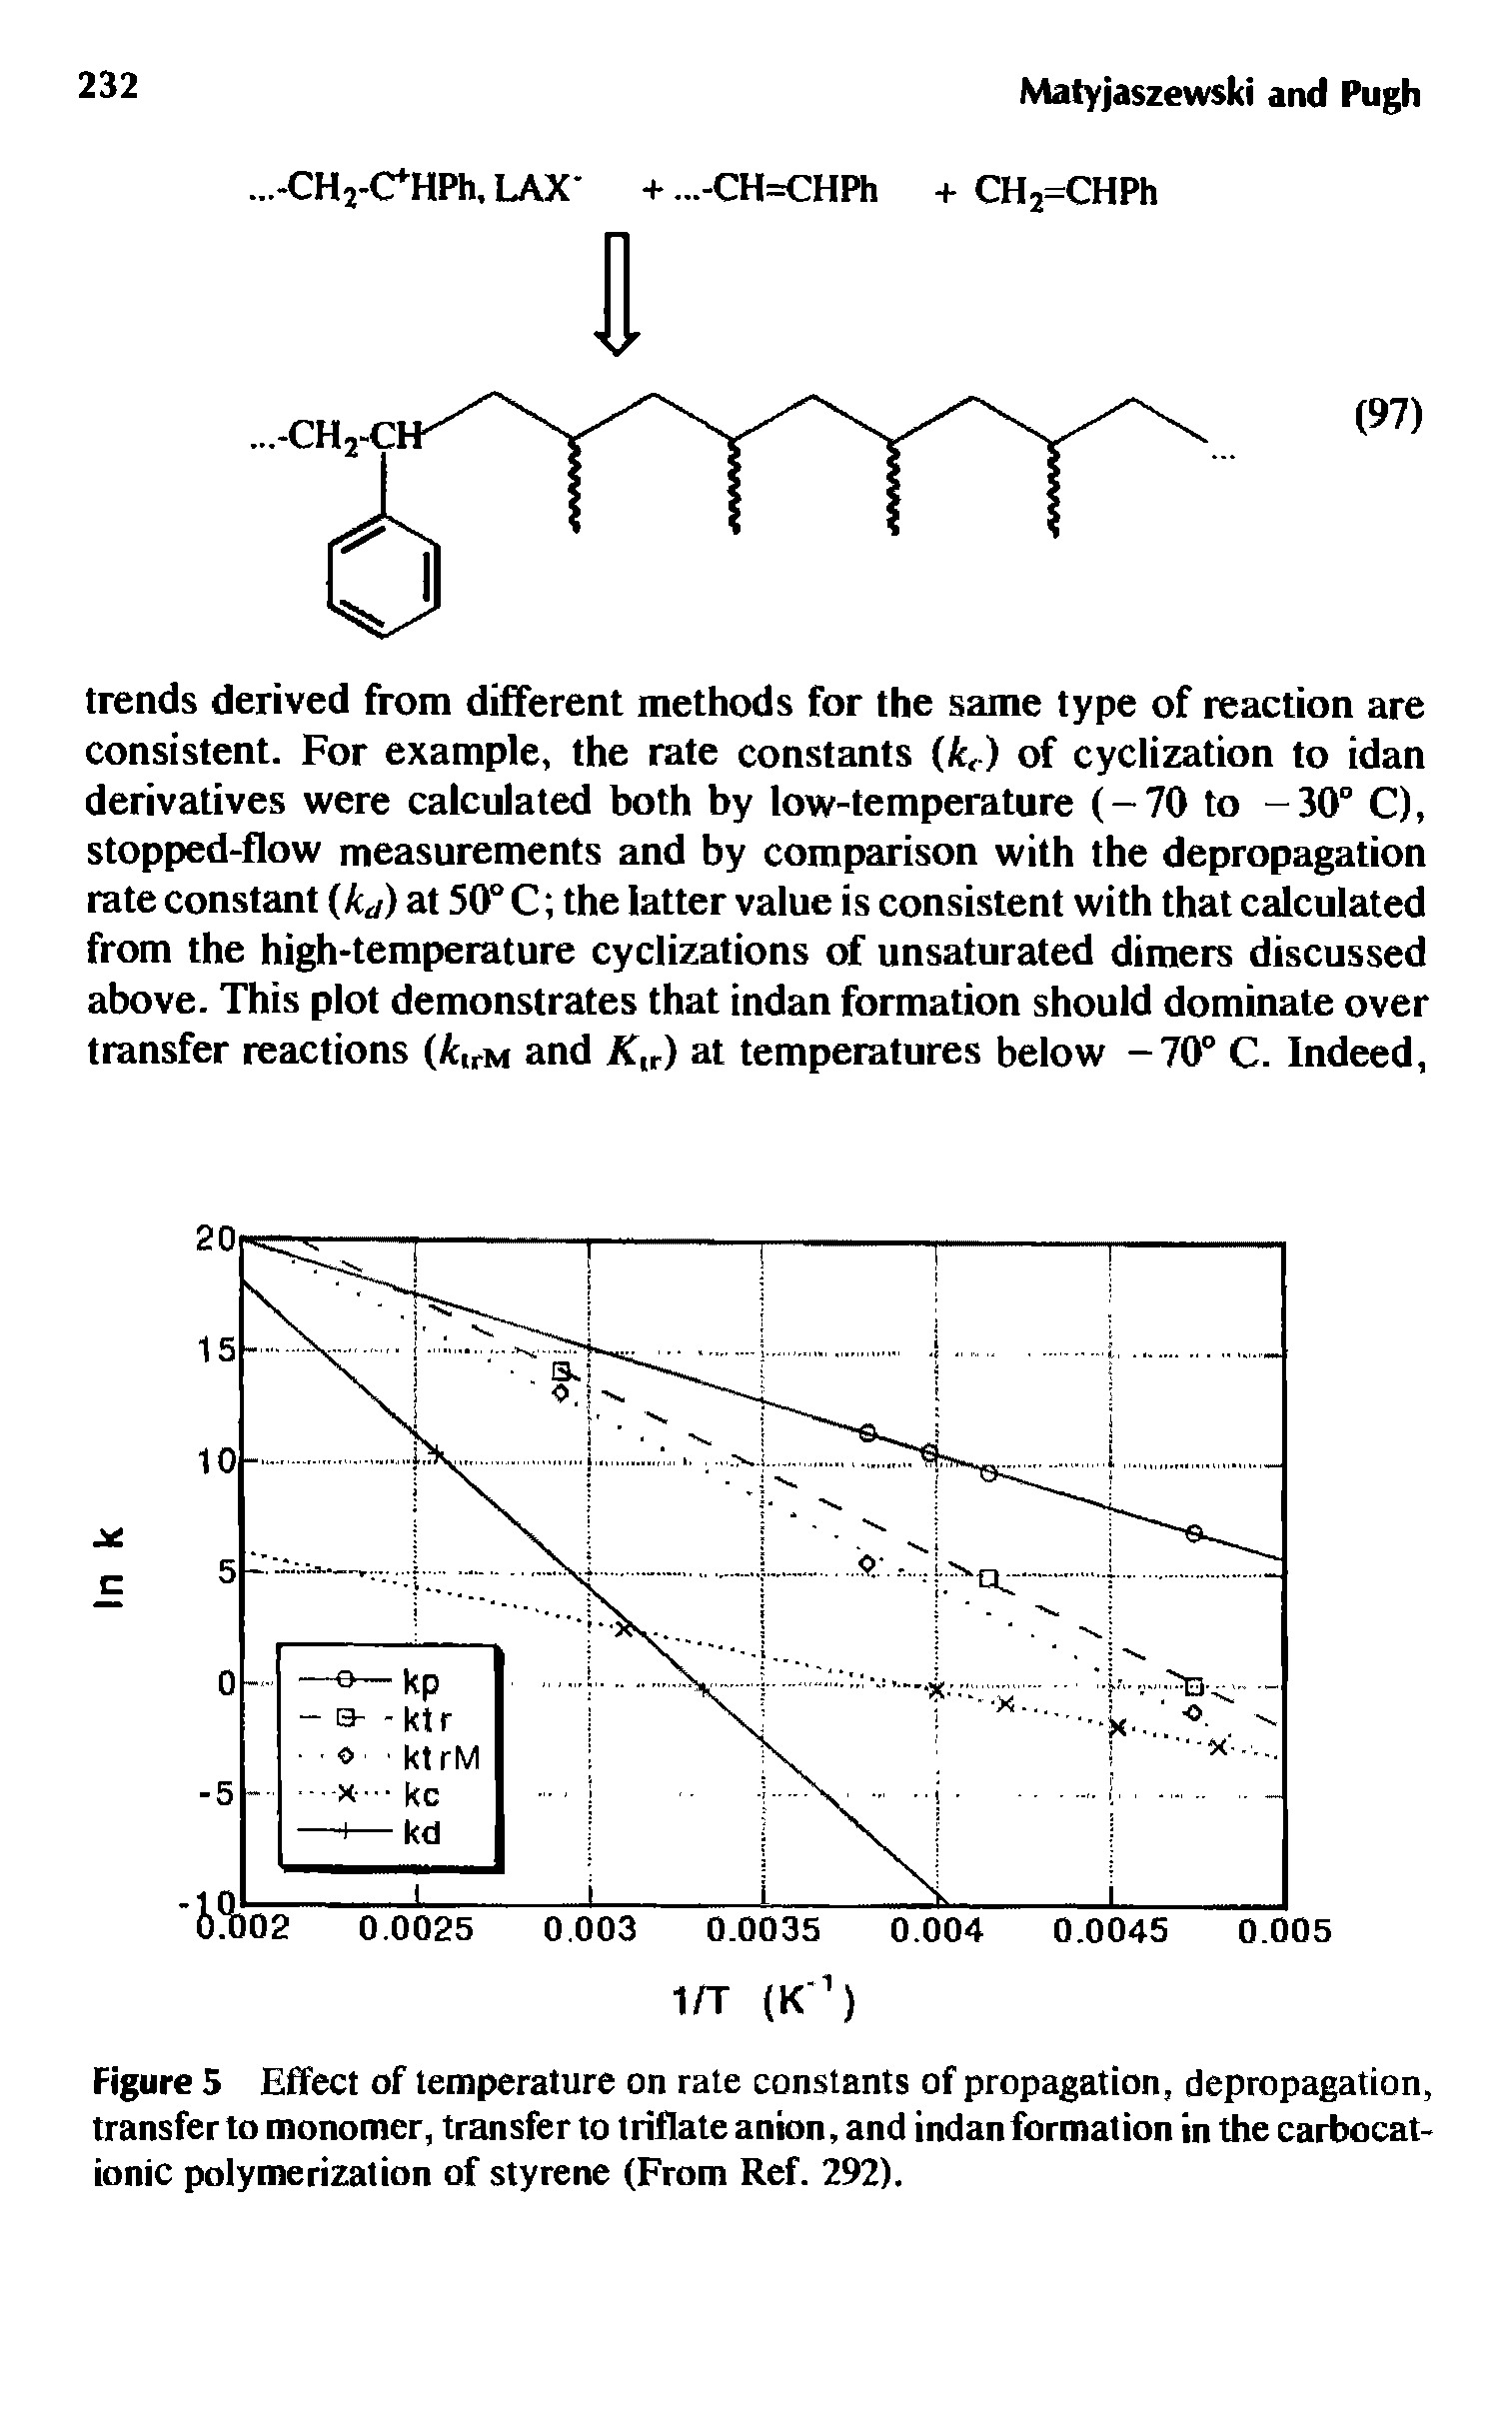 Figure 5 Effect of temperature on rate constants of propagation, depropagation, transfer to monomer, transfer to triflate anion, and indan formation in the carbocat-ionic polymerization of styrene (From Ref. 292).